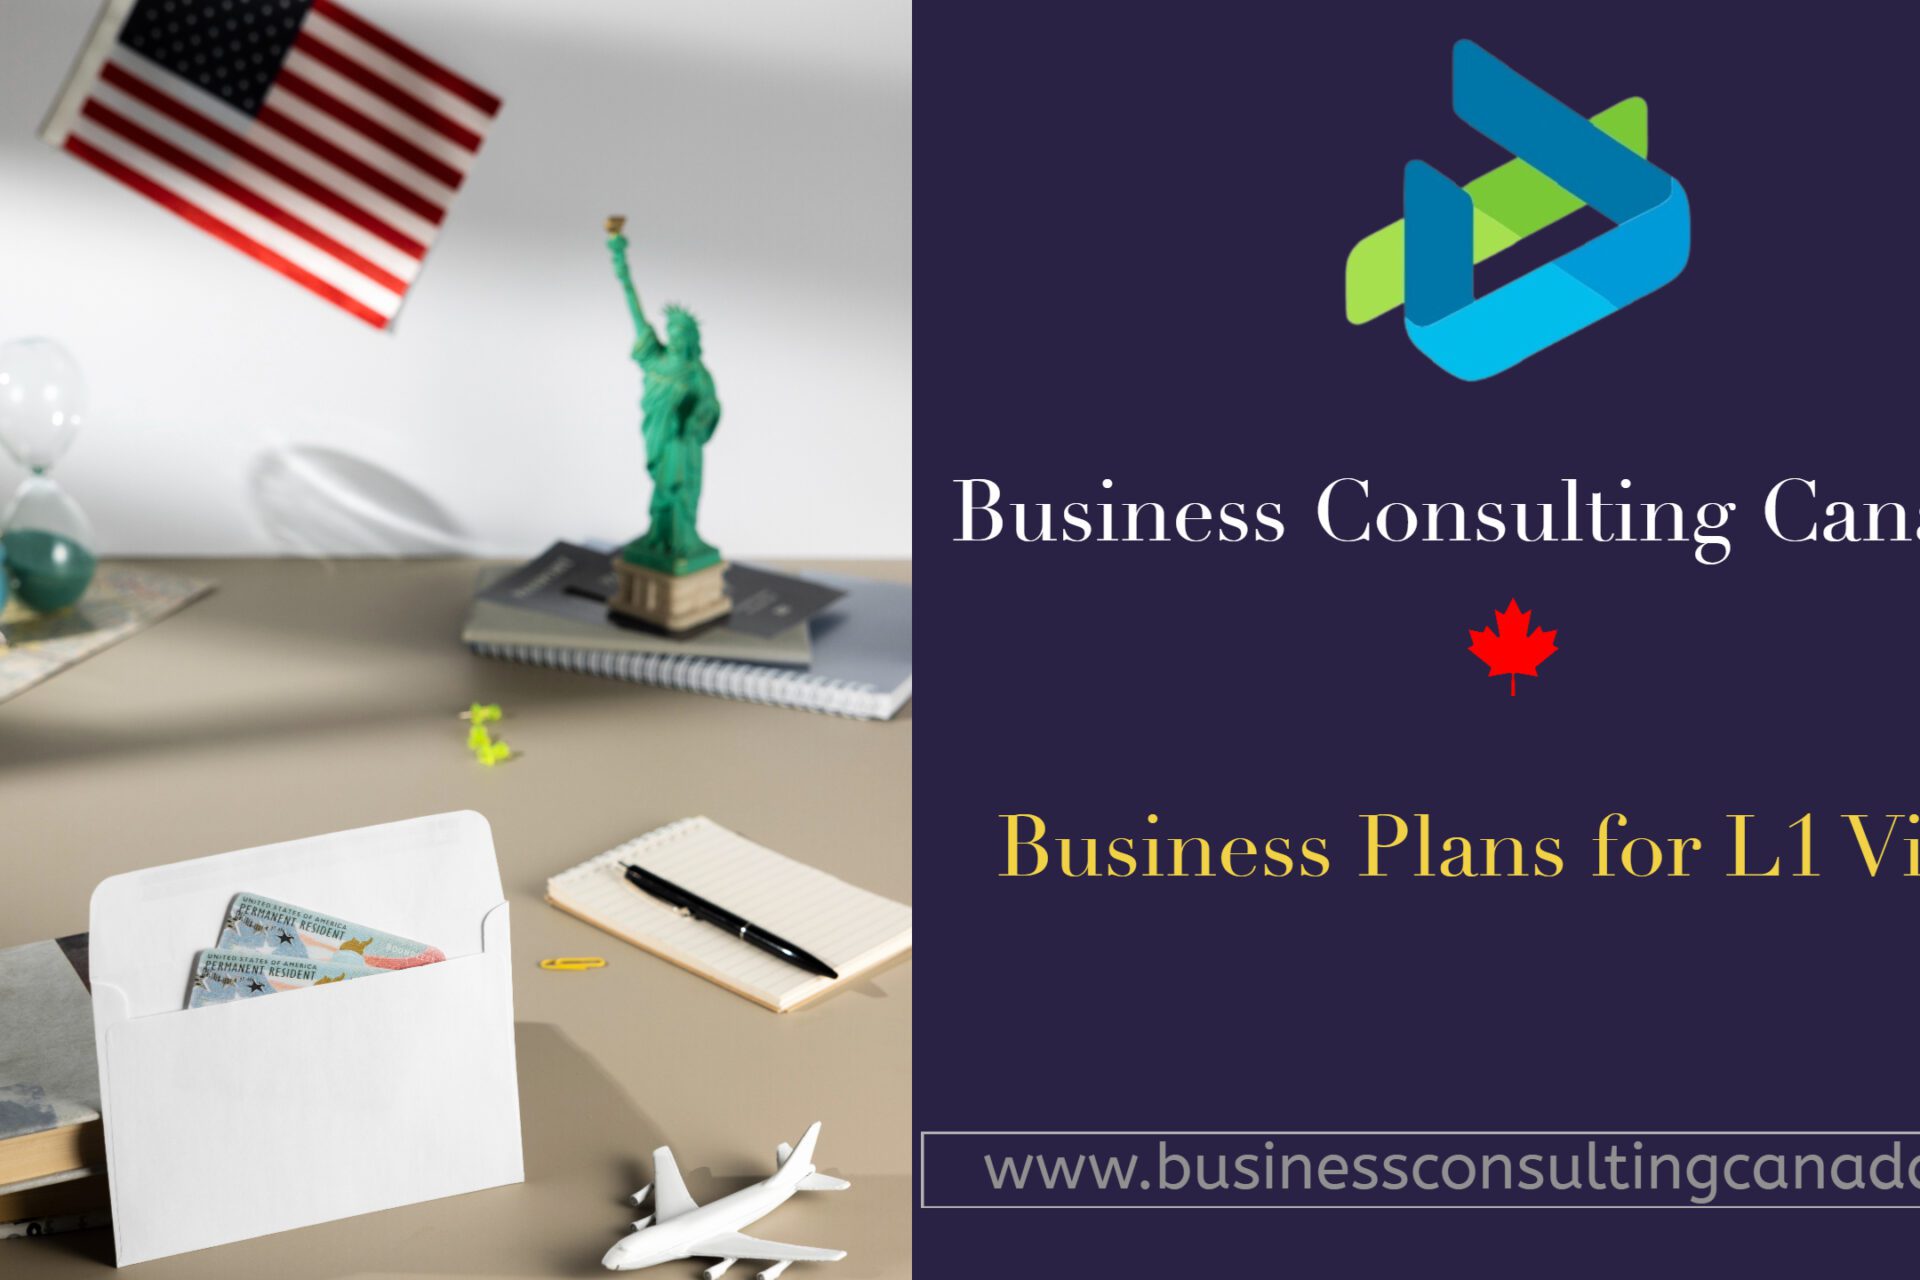 Comprehensive Guide to Crafting Business Plans for L1 Visa Applications